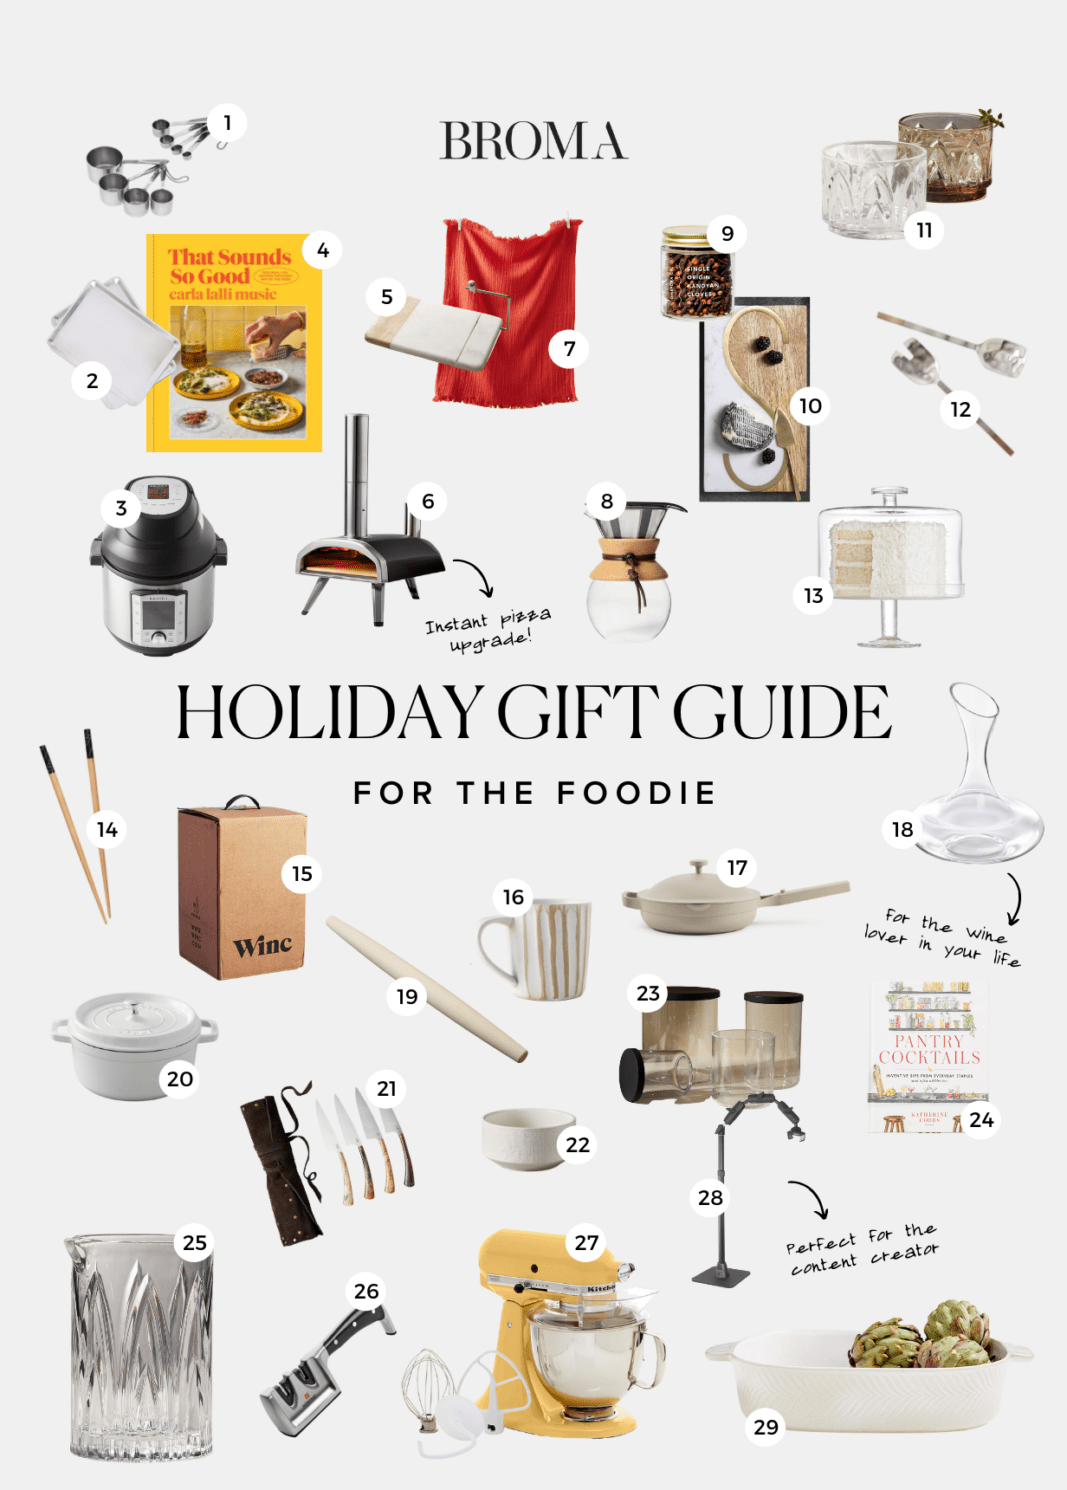 https://bromabakery.com/wp-content/uploads/2021/11/HOLIDAY-GIFT-GUIDE-6-1067x1490.webp